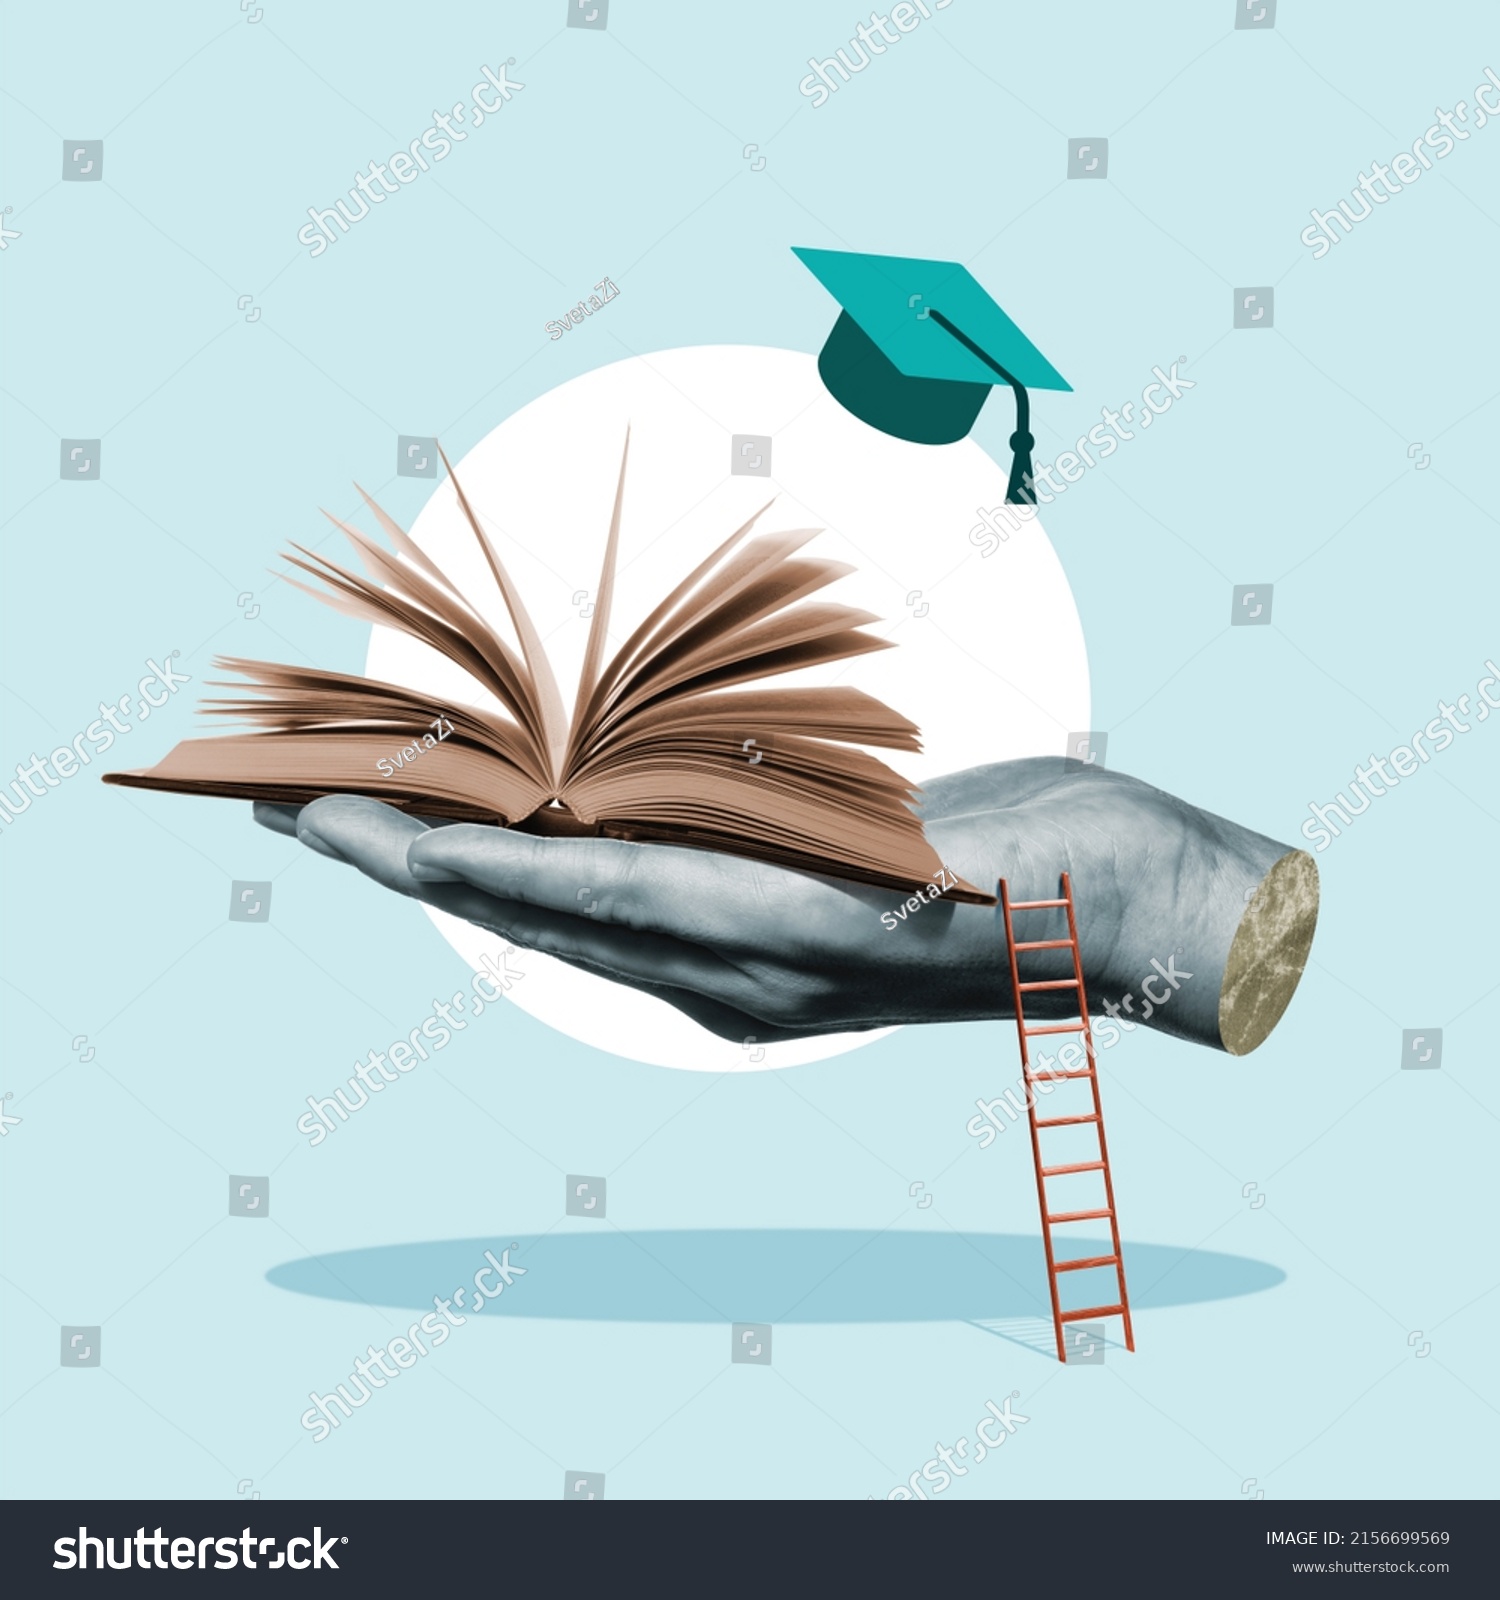 Open book on the palm. Education concept. #2156699569